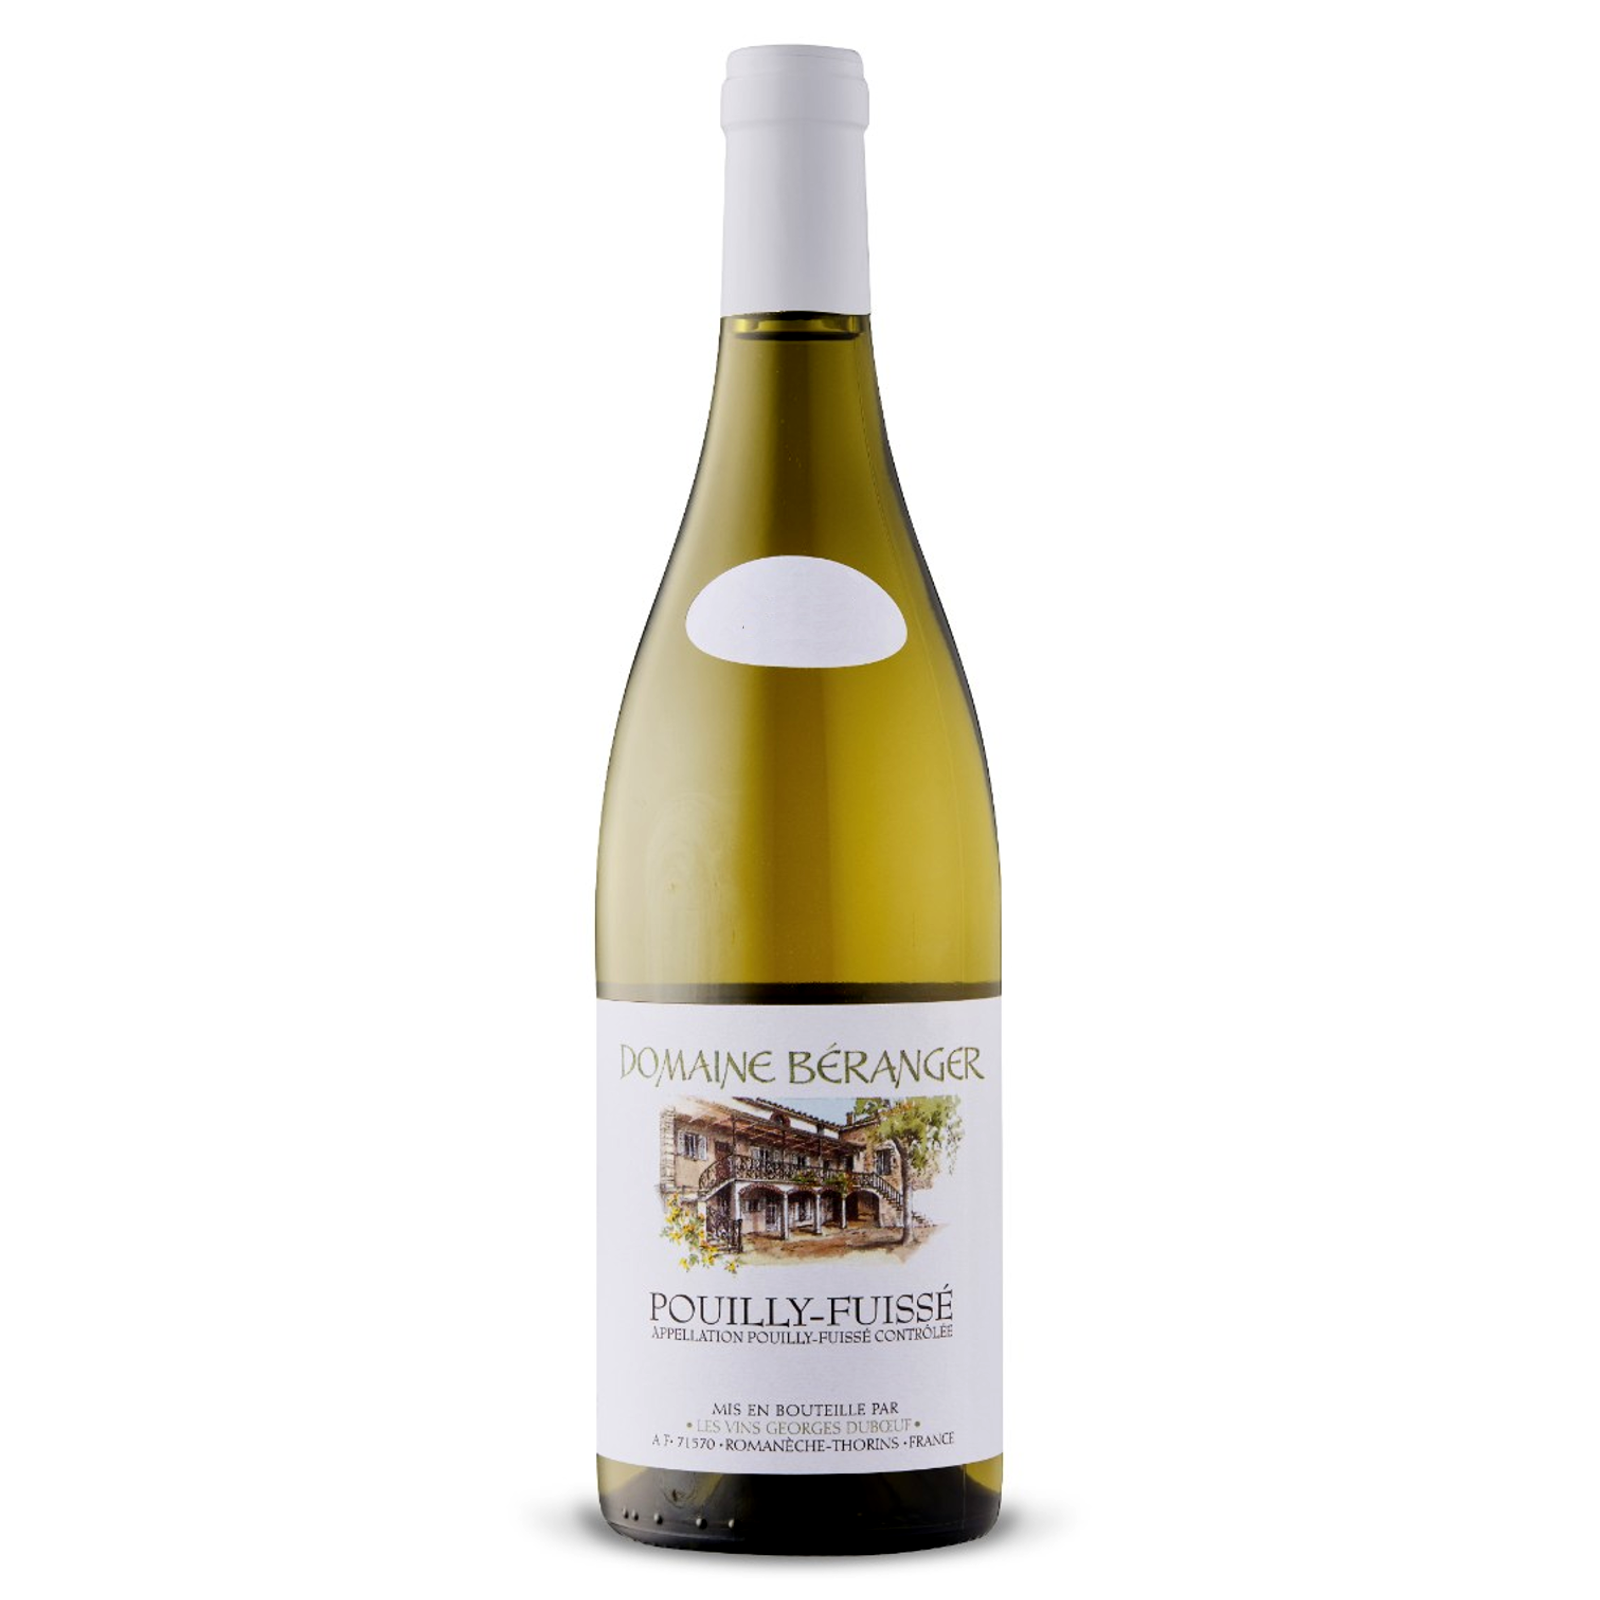 Georges Duboeuf Pouilly-Fuisse Domaine Beranger 2019 White Wine – Burgundy France